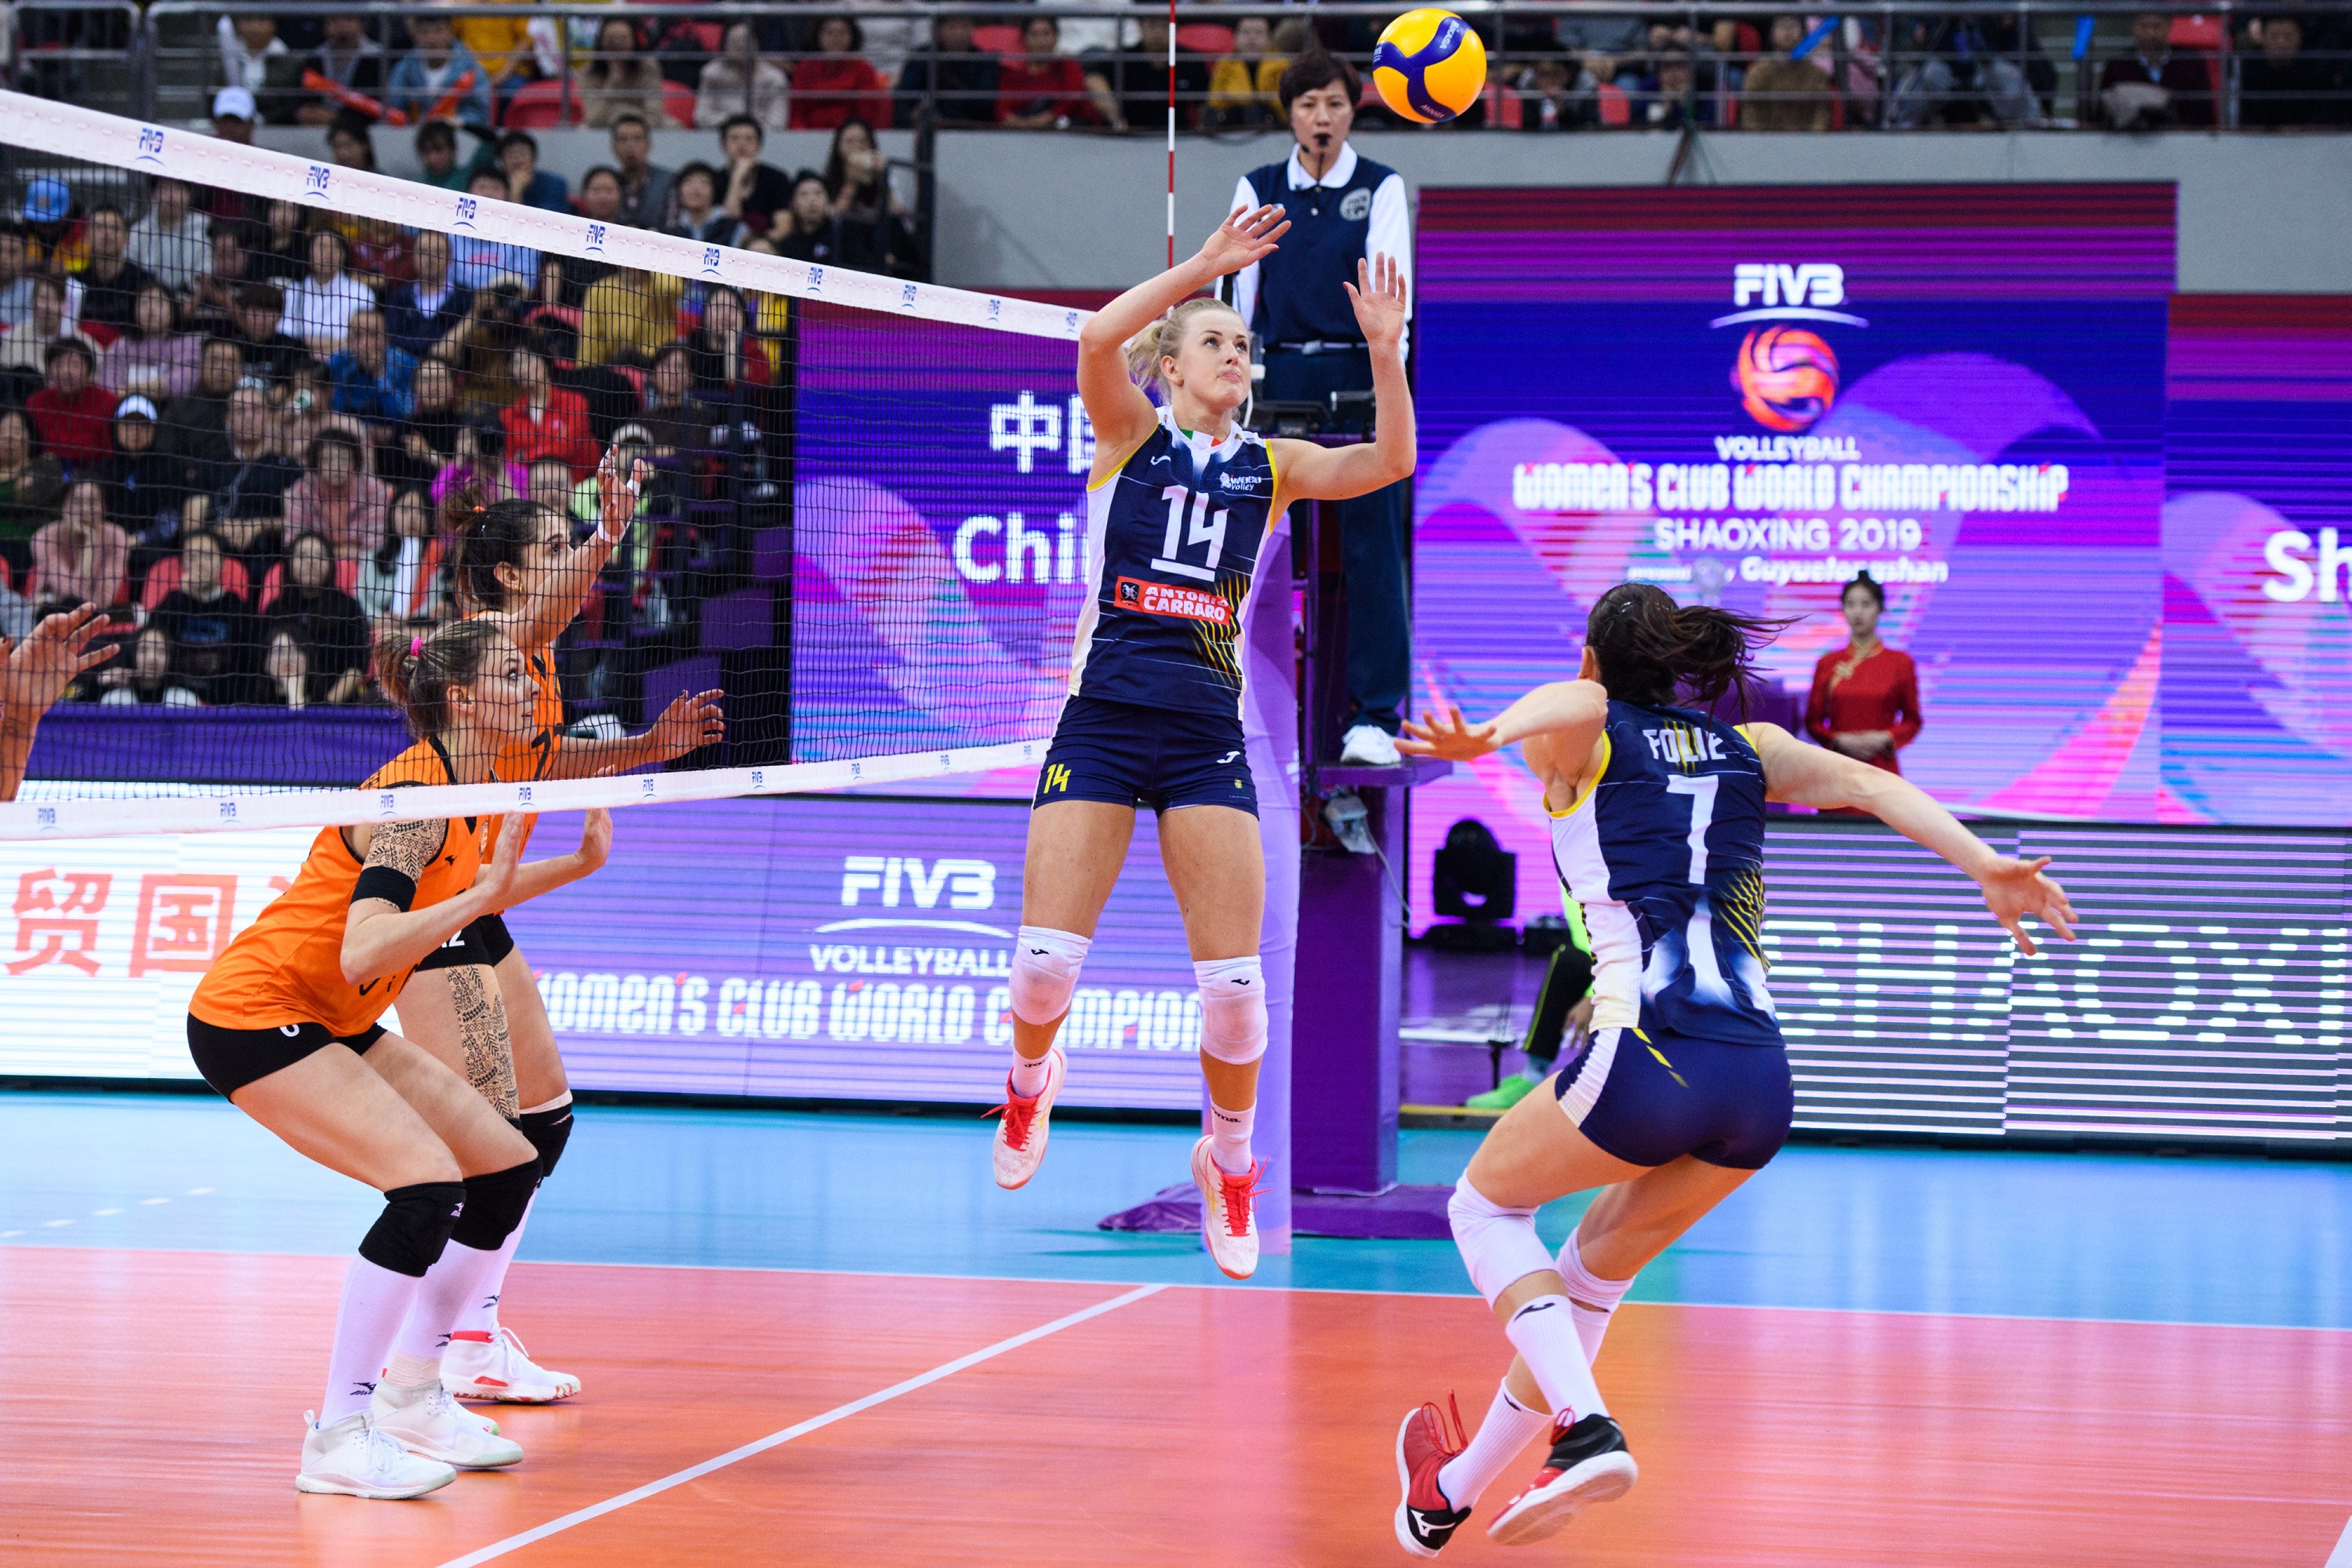 FIVB confirms teams for the FIVB Volleyball Men’s and Women’s Club